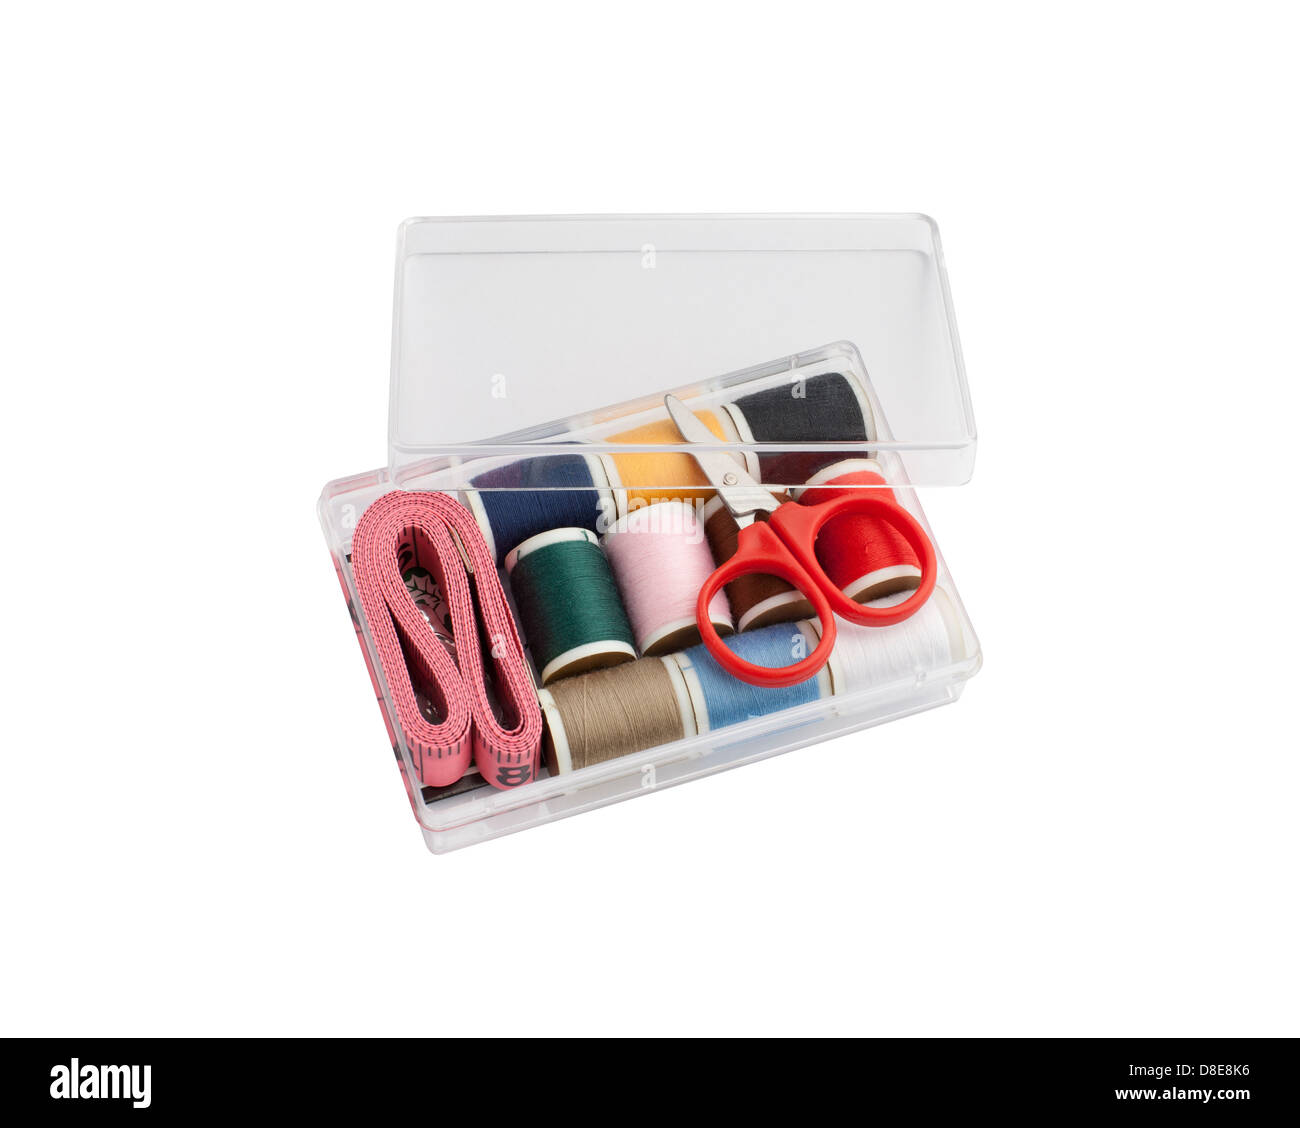 mini sewing set in plastic box isolated on white background Stock Photo